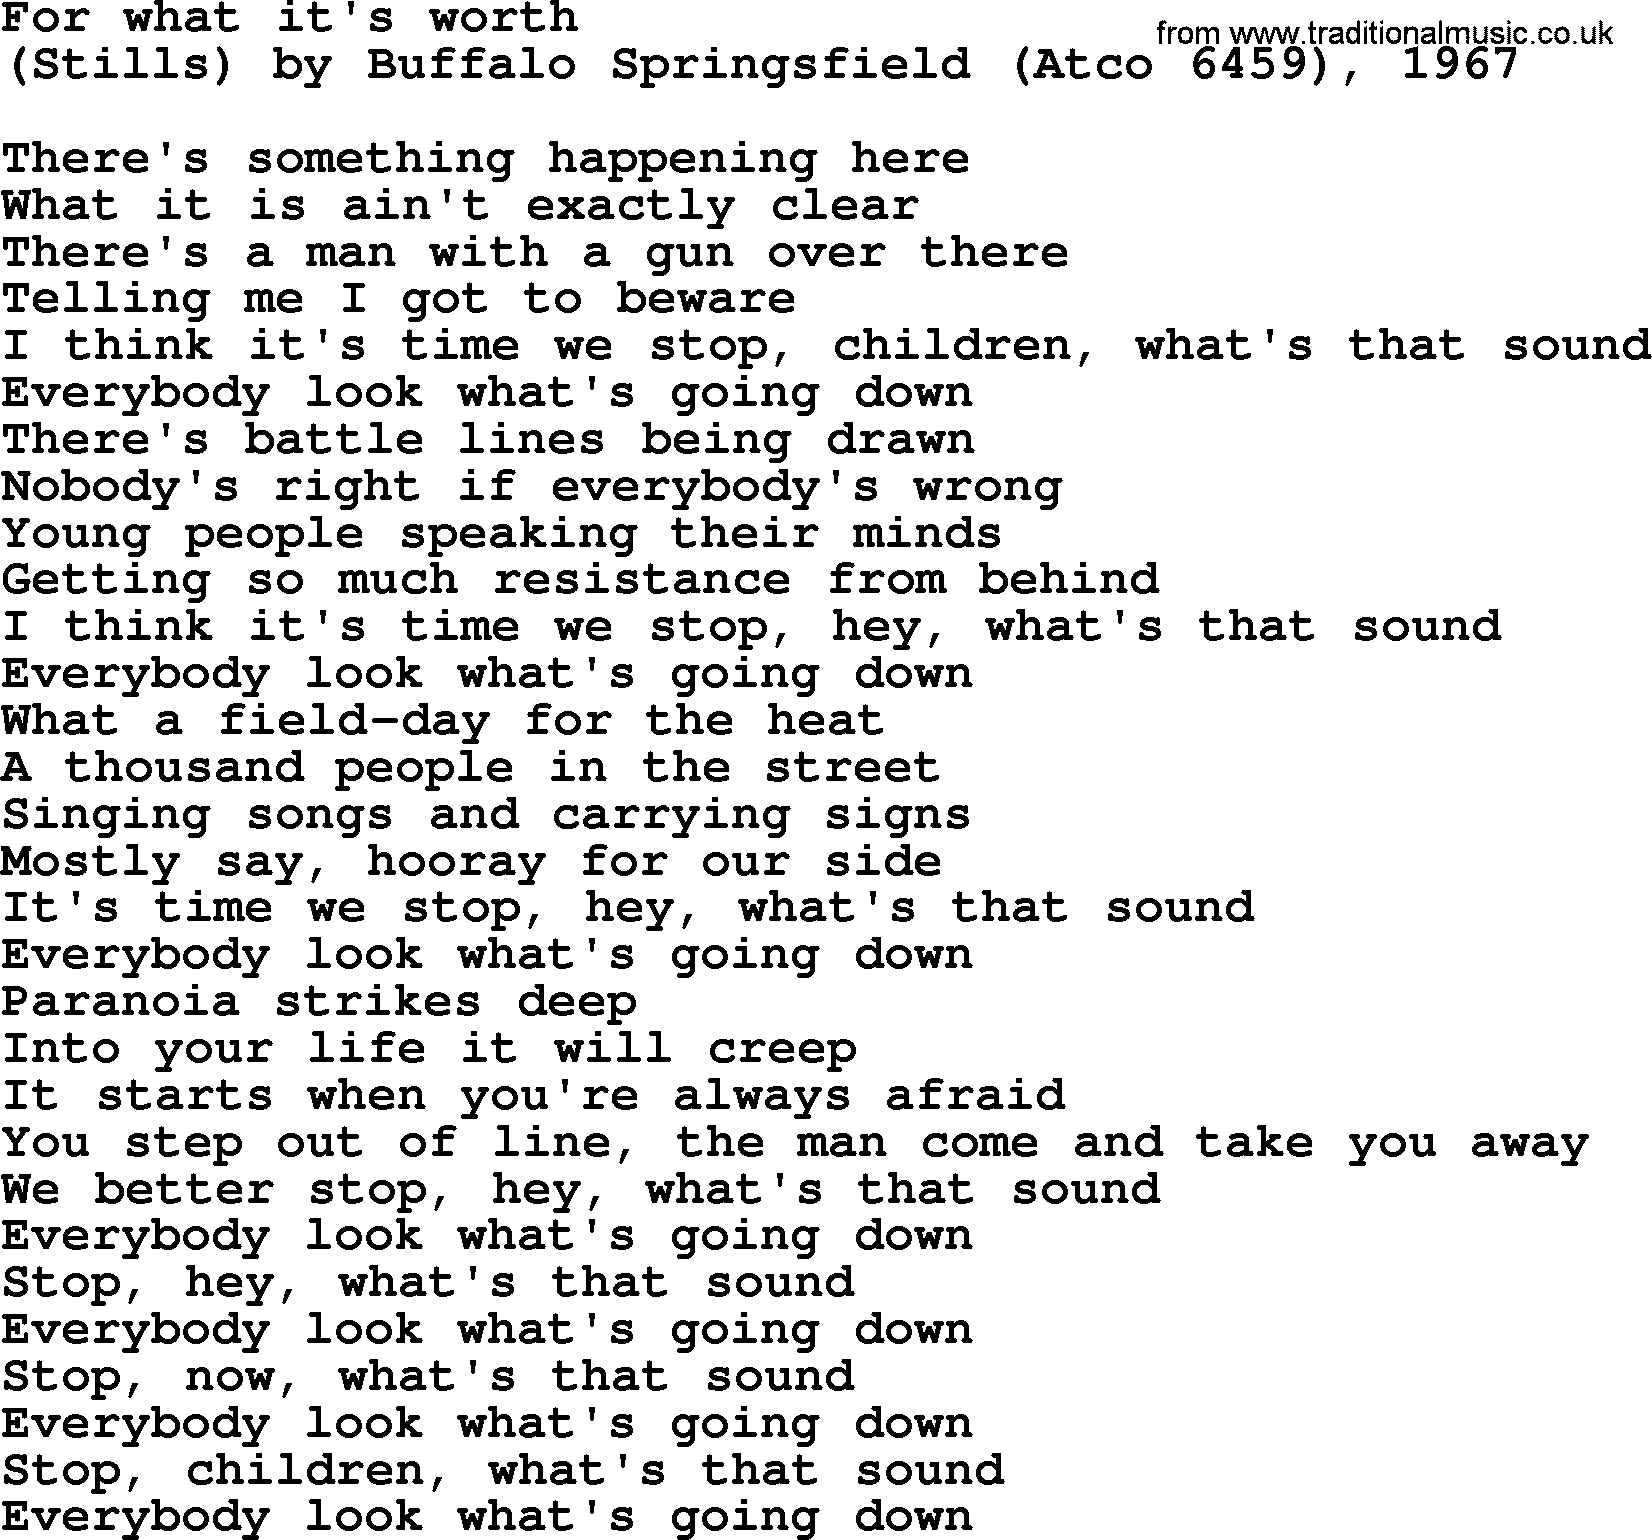 Bruce Springsteen song: For What It's Worth lyrics